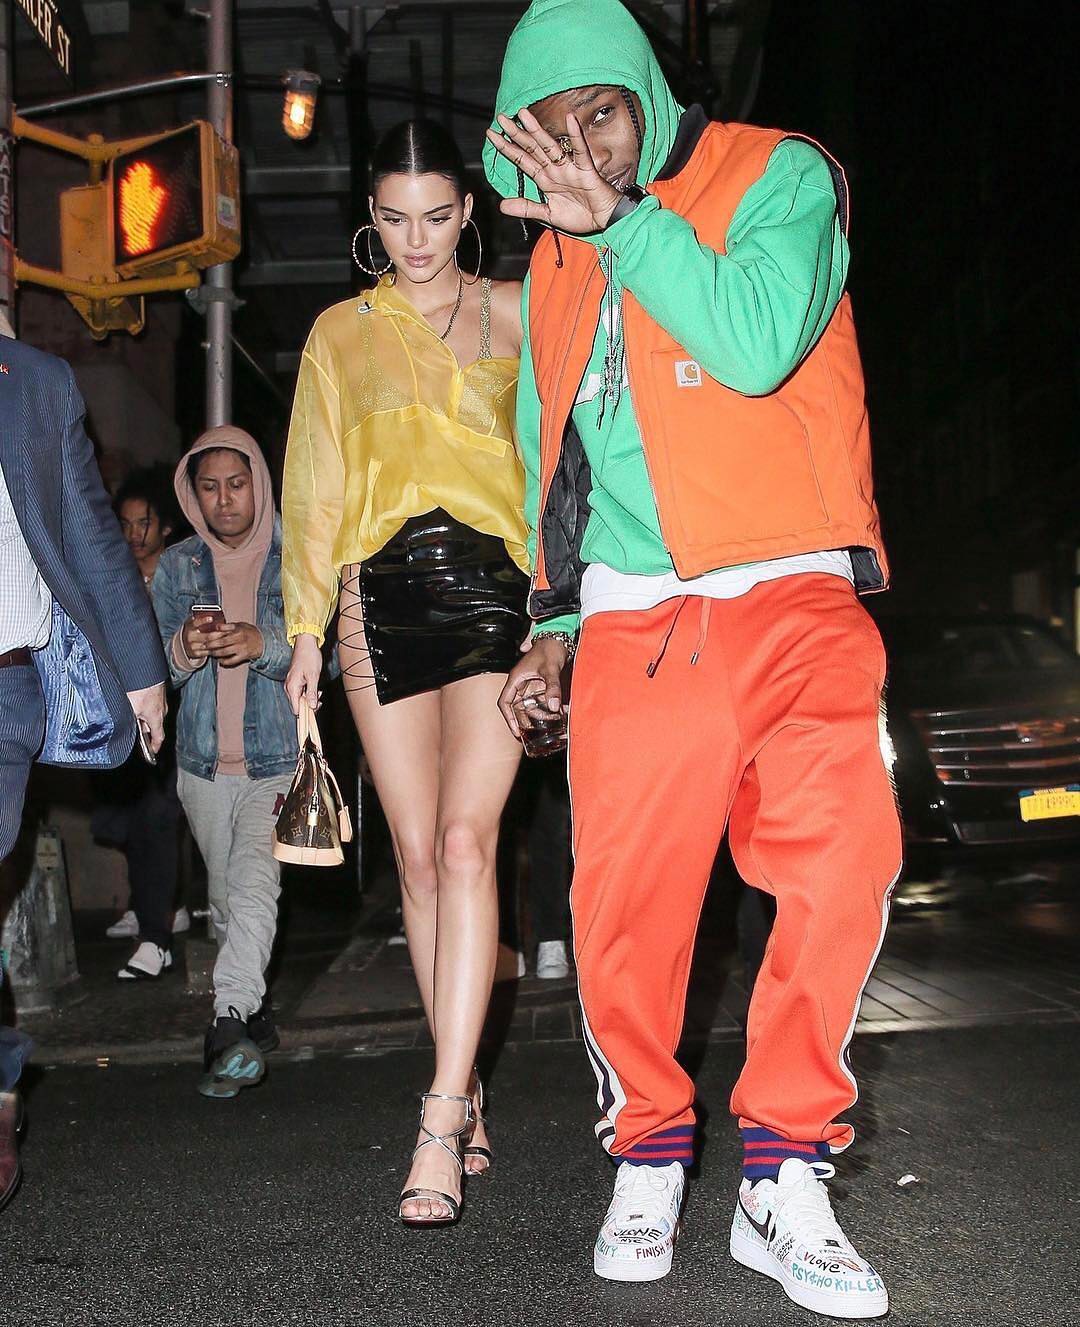 SPOTTED: A$AP Rocky In Unreleased Carharrt x VLONE Vest, Gucci Track Pants And Nike Sneakers